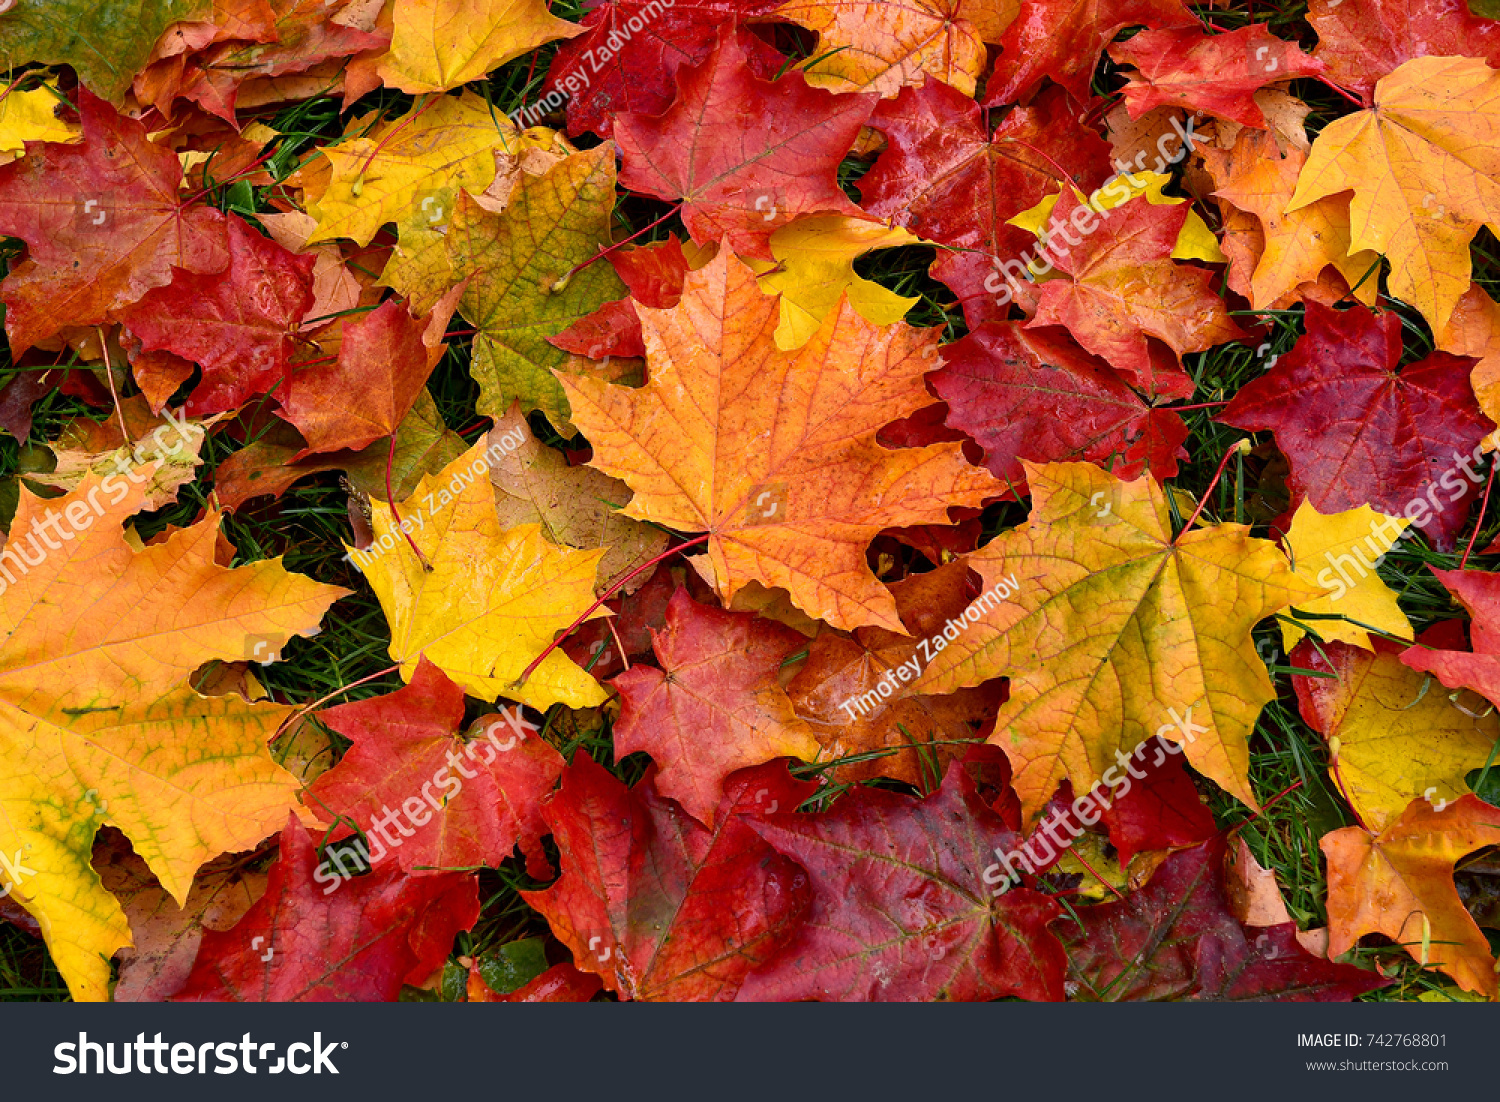 Autumn. Multicolored maple leaves lie on the grass. #742768801